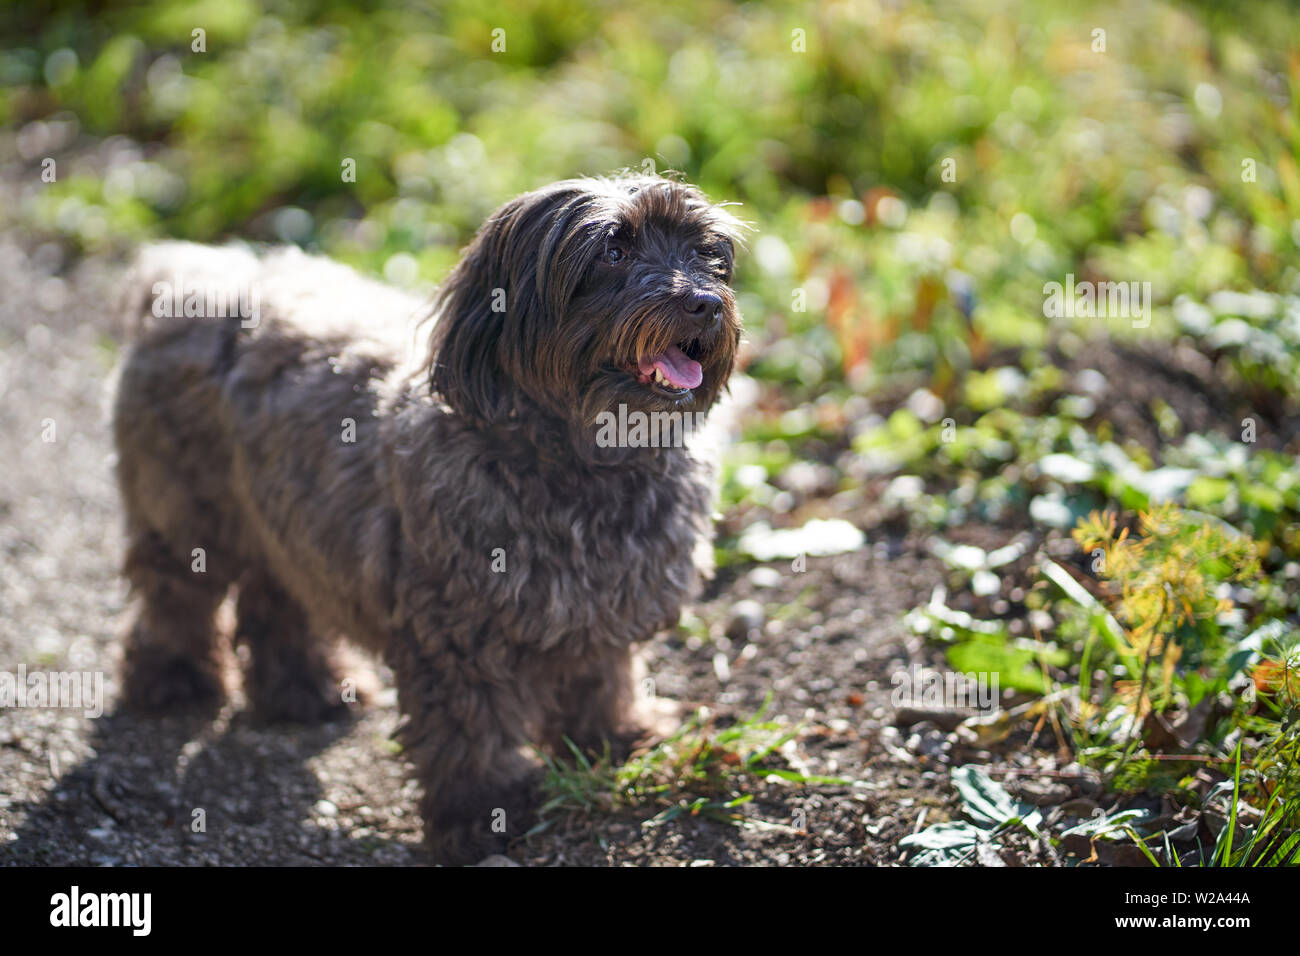 Black havenese dog looking up outdoors meadows Stock Photo